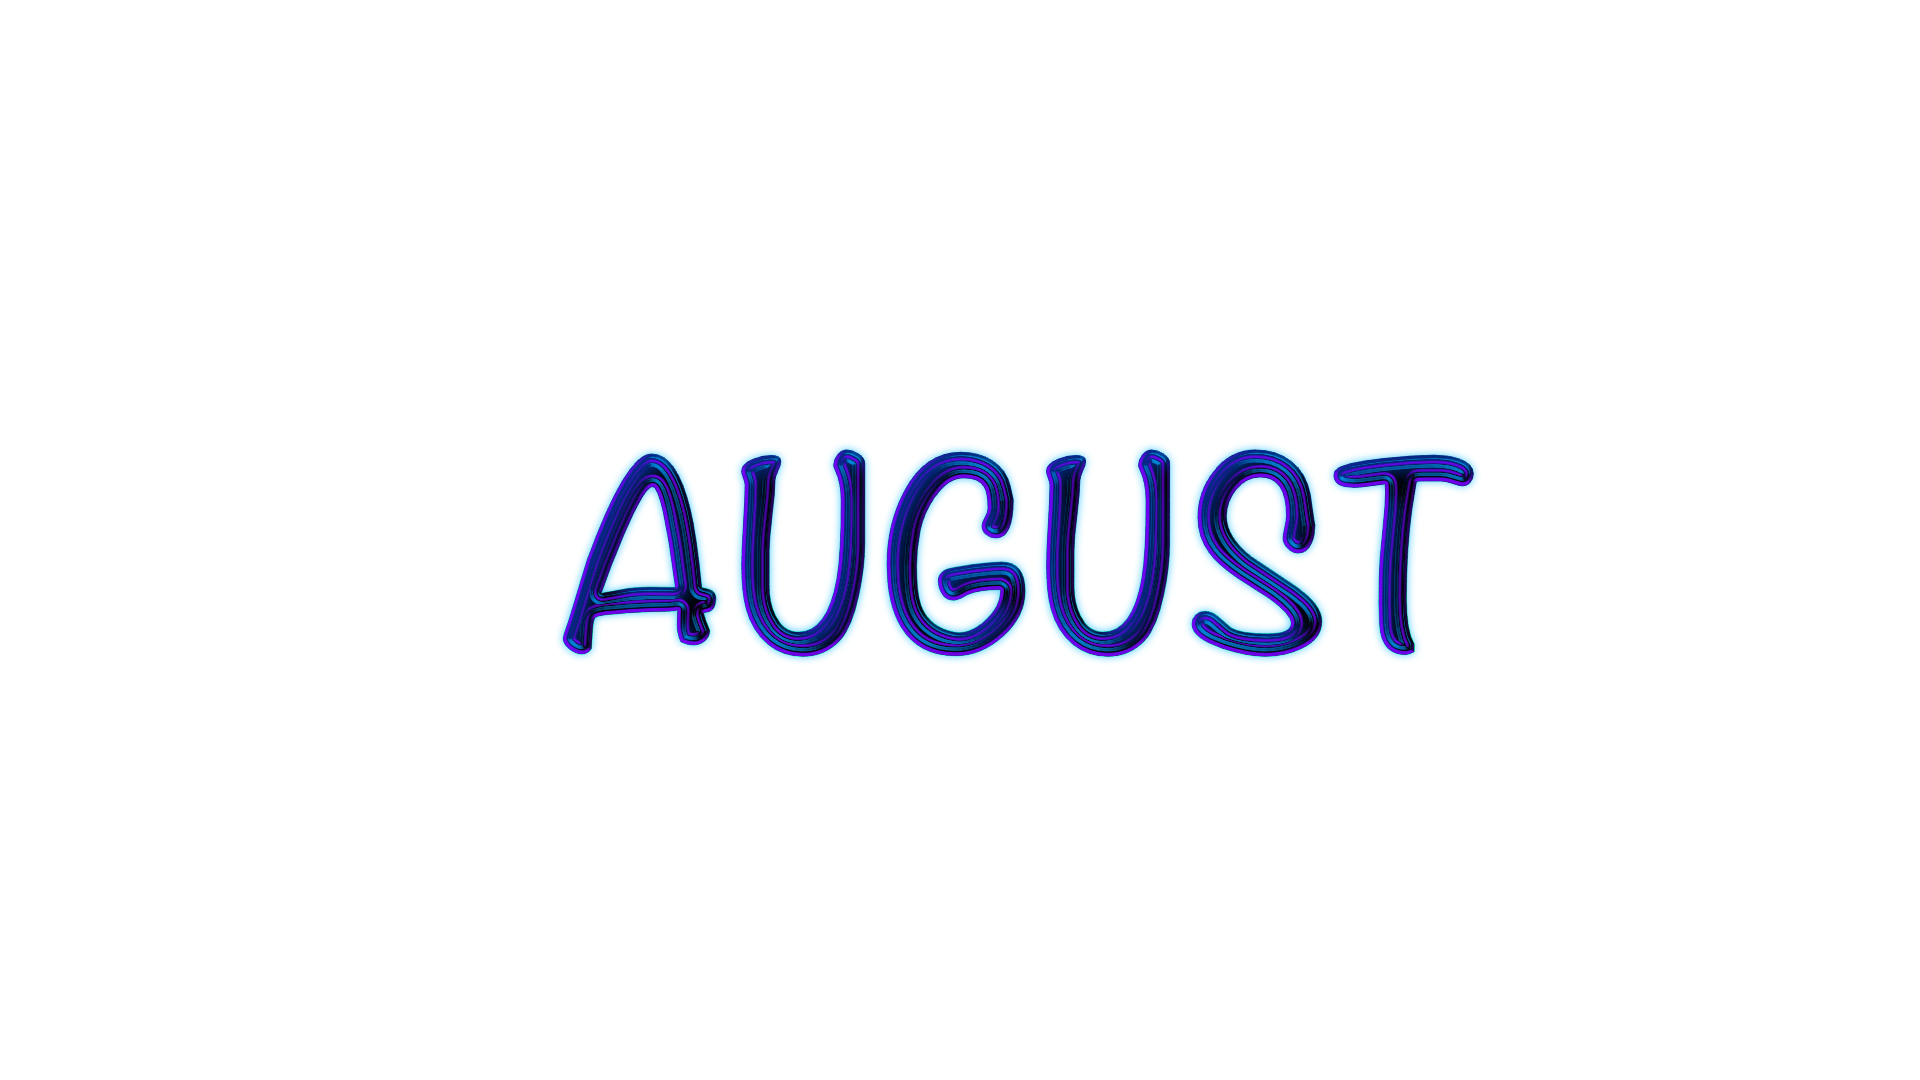 What's happening in August?